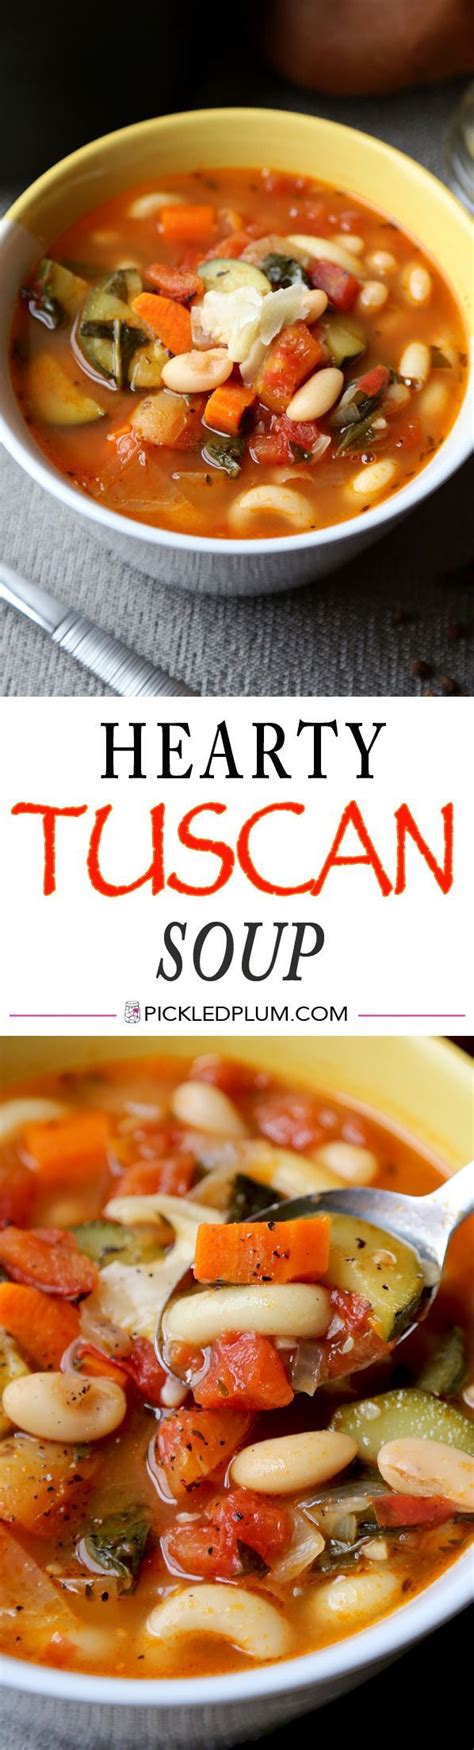 Hearty Tuscan Soup Pickled Plum Recipe Soup Recipes Tuscan Soup